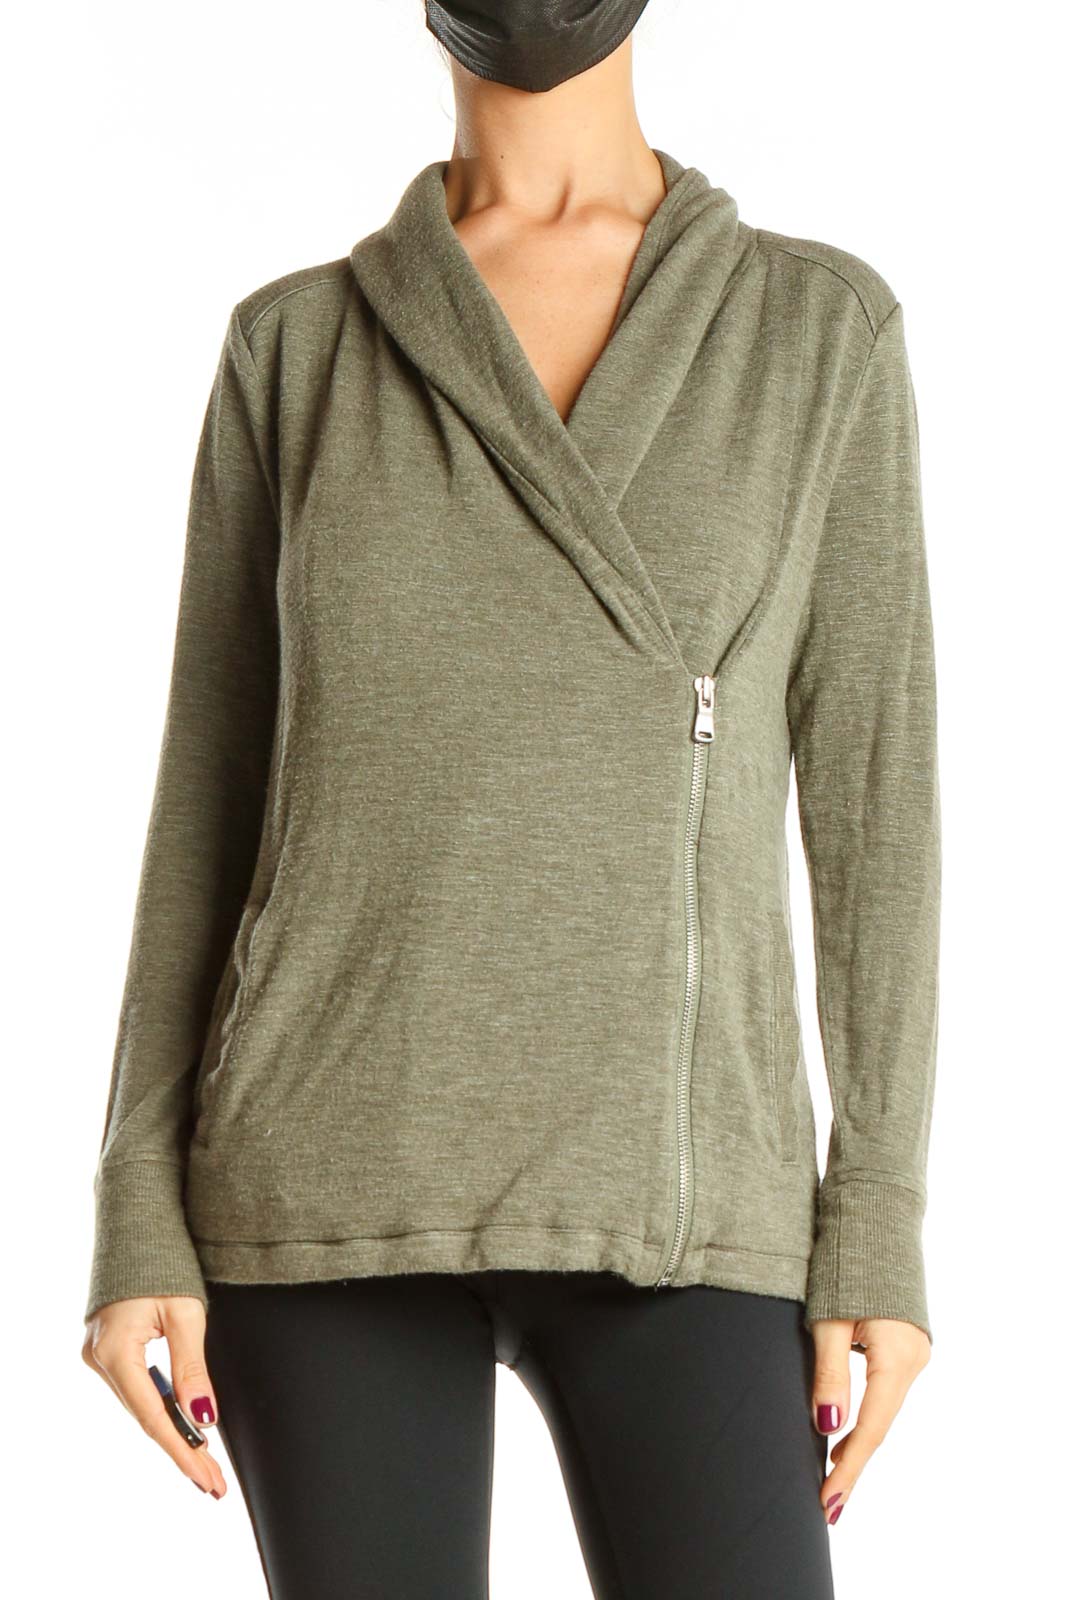 Green All Day Wear Zip-Up Sweater Front